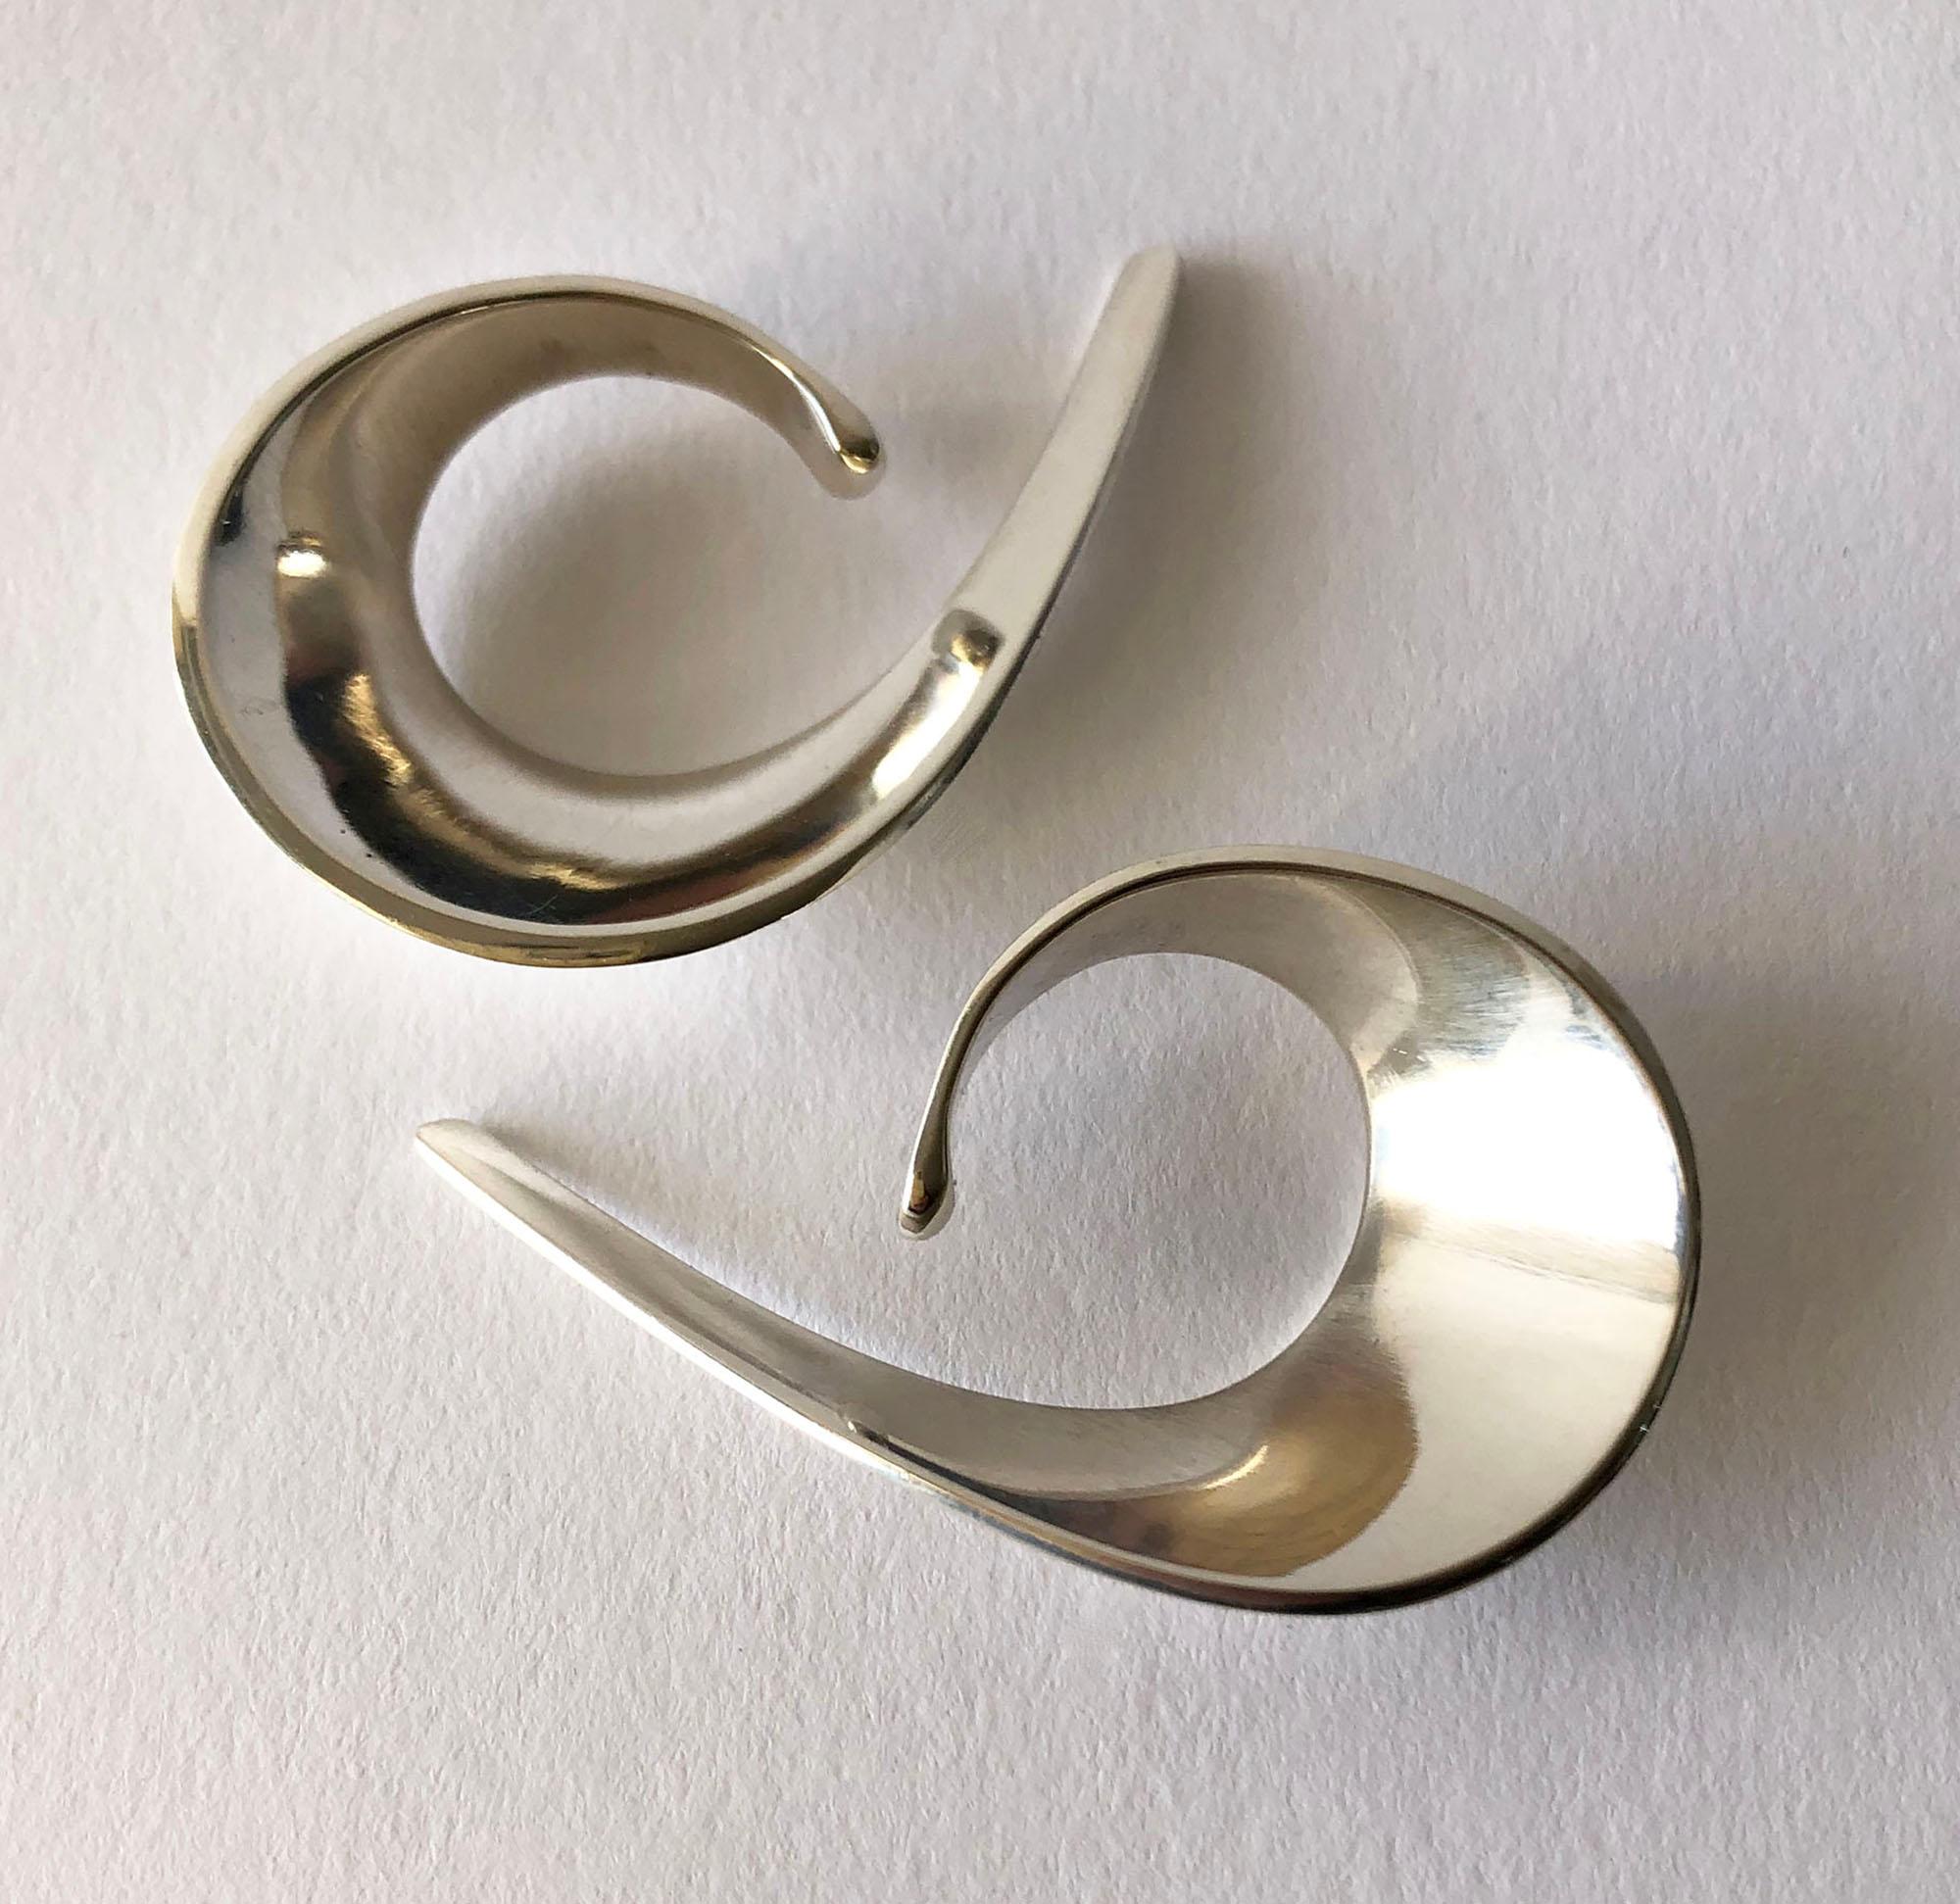 Sterling silver sling earrings created in 1958 by goldsmith/silversmith and jewelry designer, Tone Vigeland. Earrings fit within the ear and have no post or finding.  See my last picture to view how they are worn.  Earrings measure 2